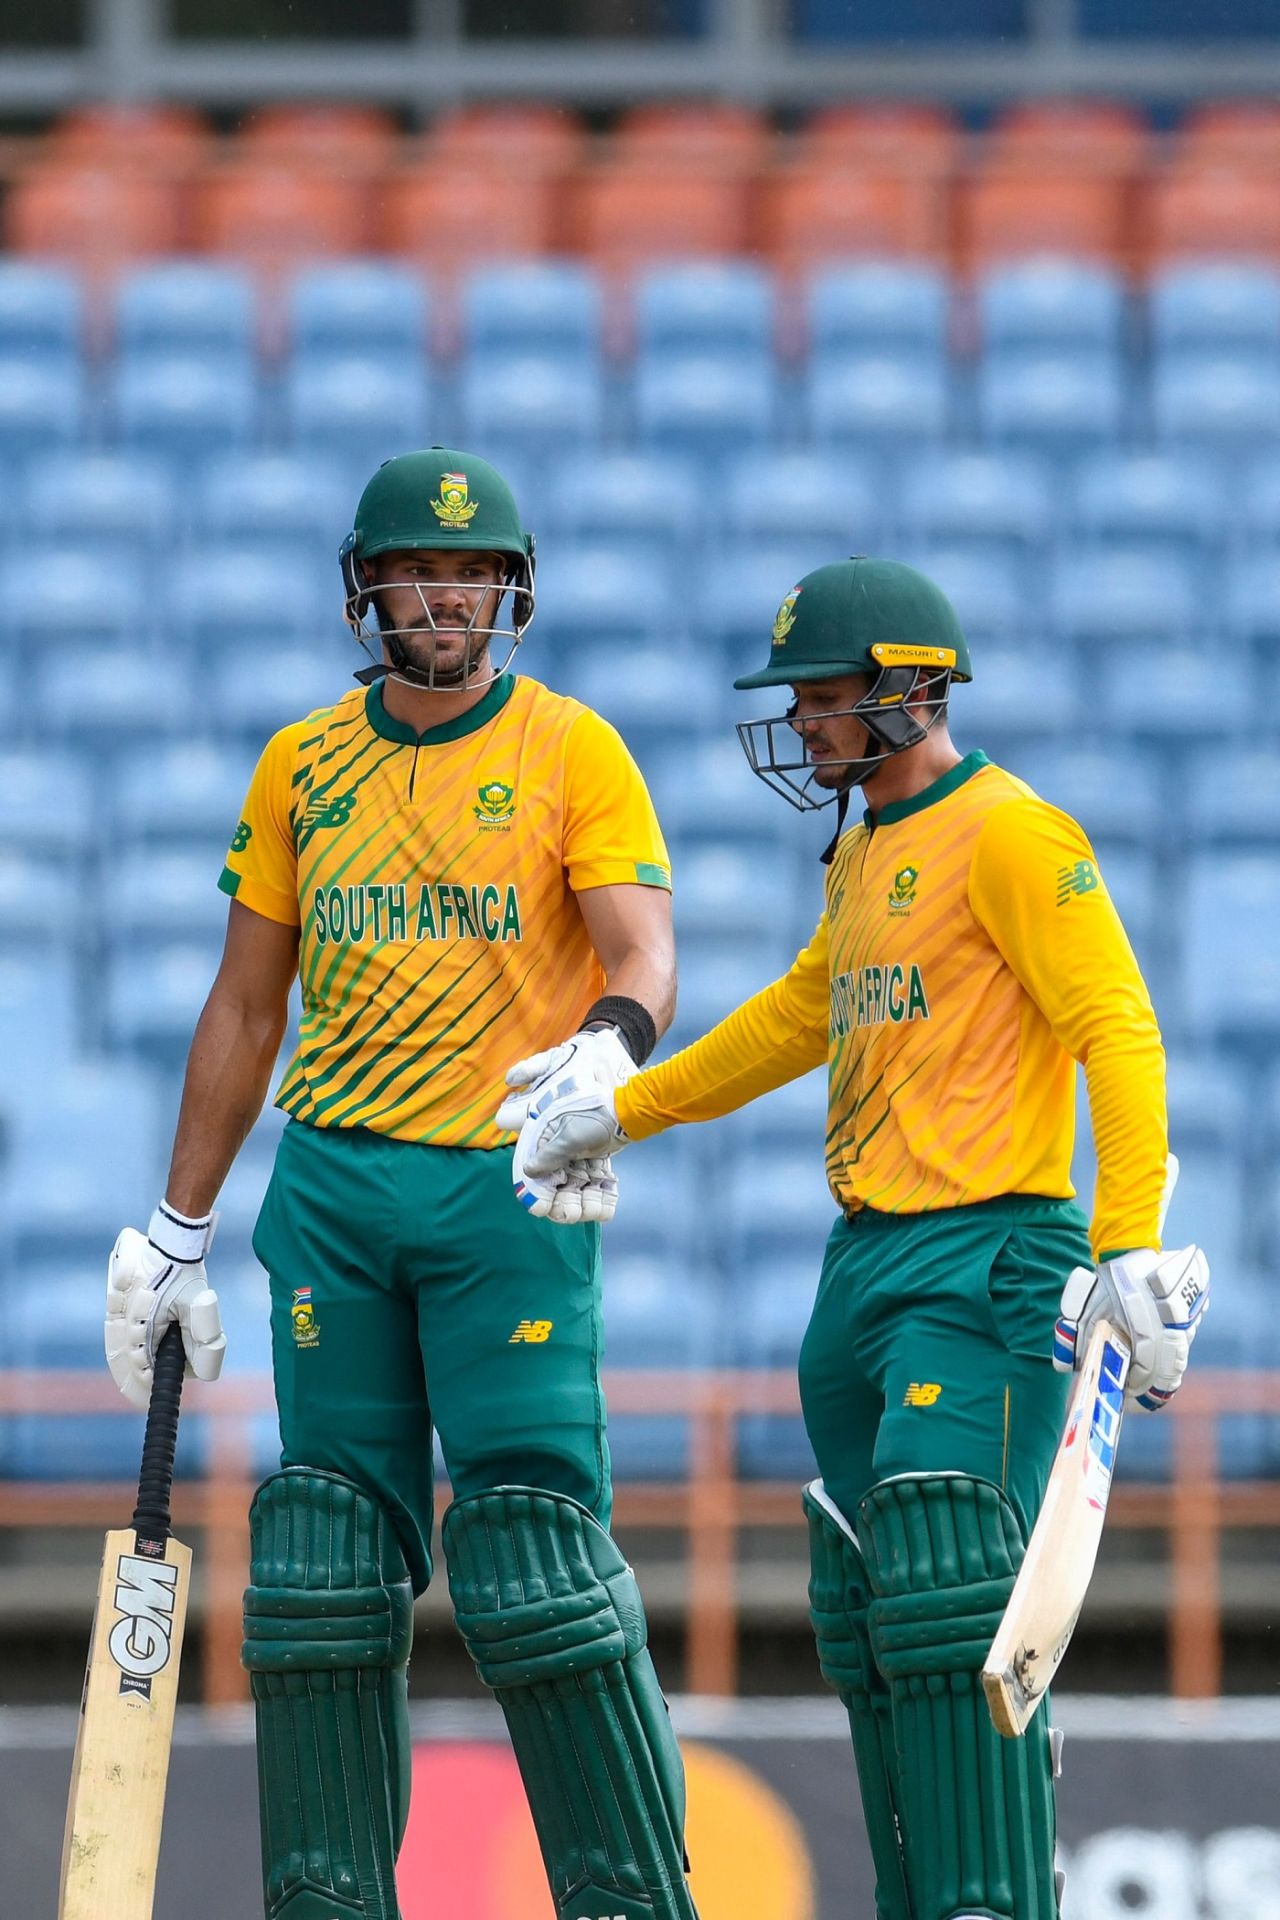 Aiden Markram and Quinton de Kock shared 128 for the second wicket, West Indies vs South Africa, 5th T20I, St George's, July 3, 2021